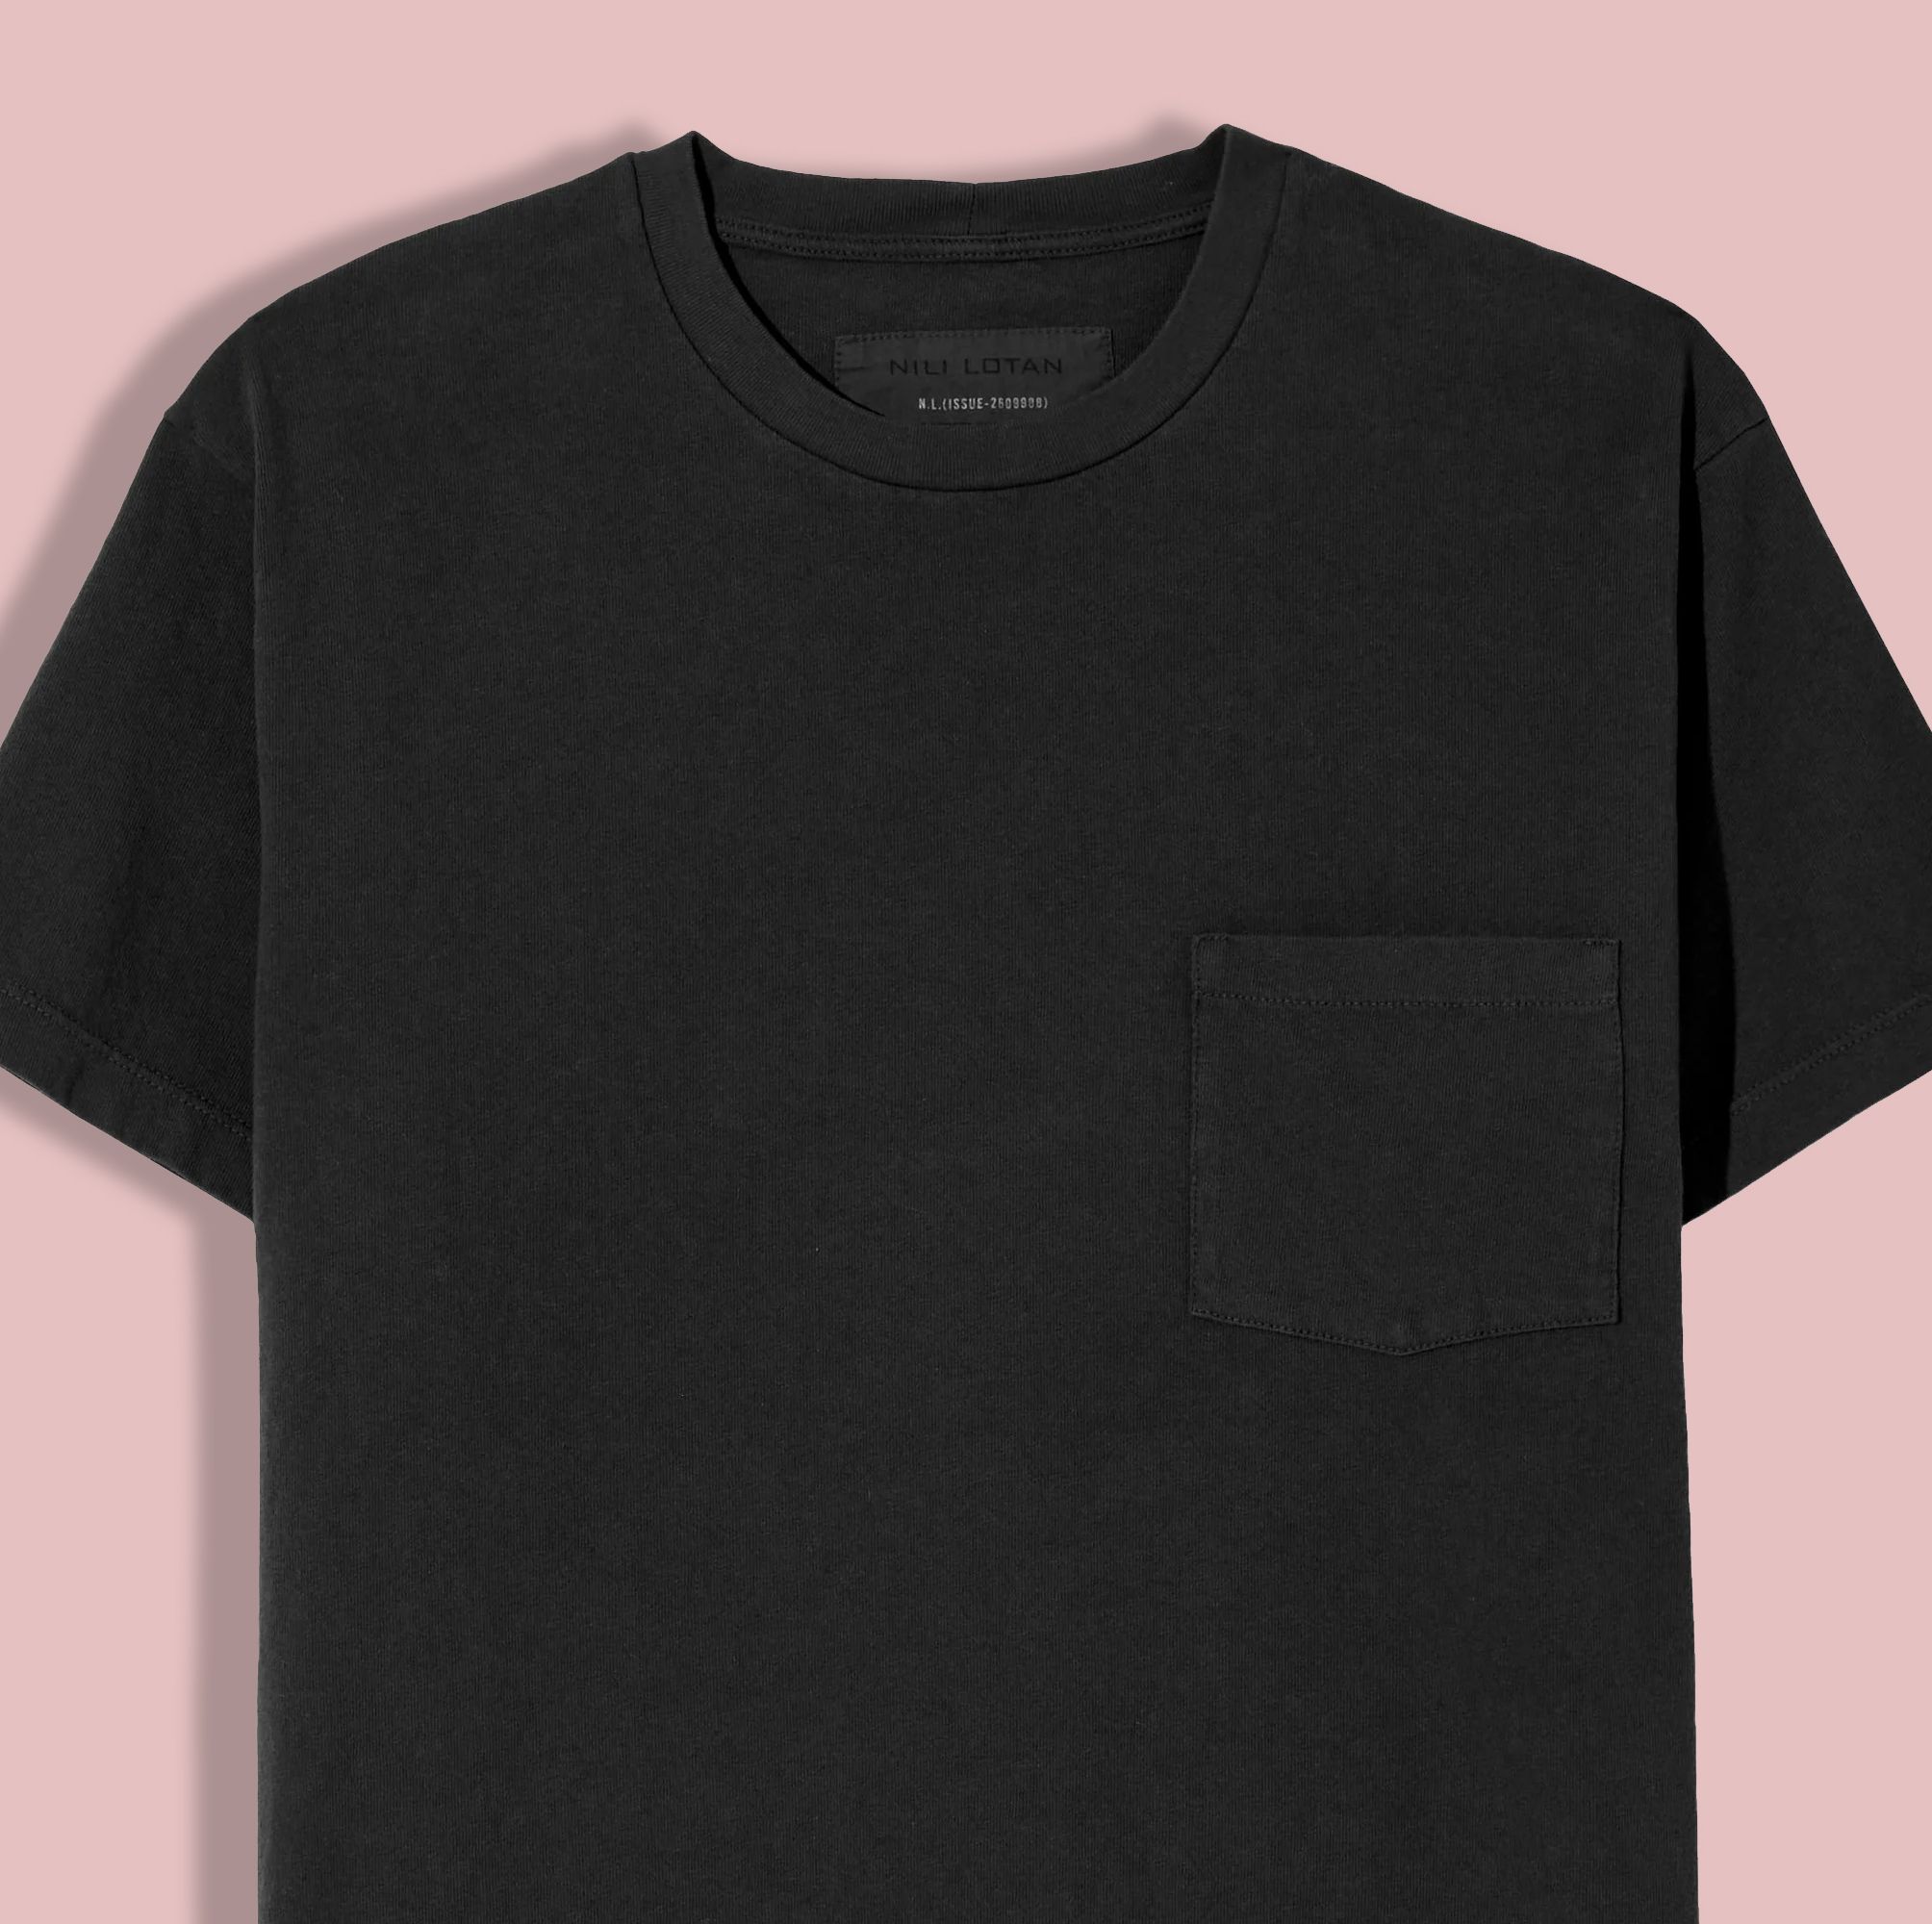 The 35 Essential T-Shirt Brands Every Man Should Know